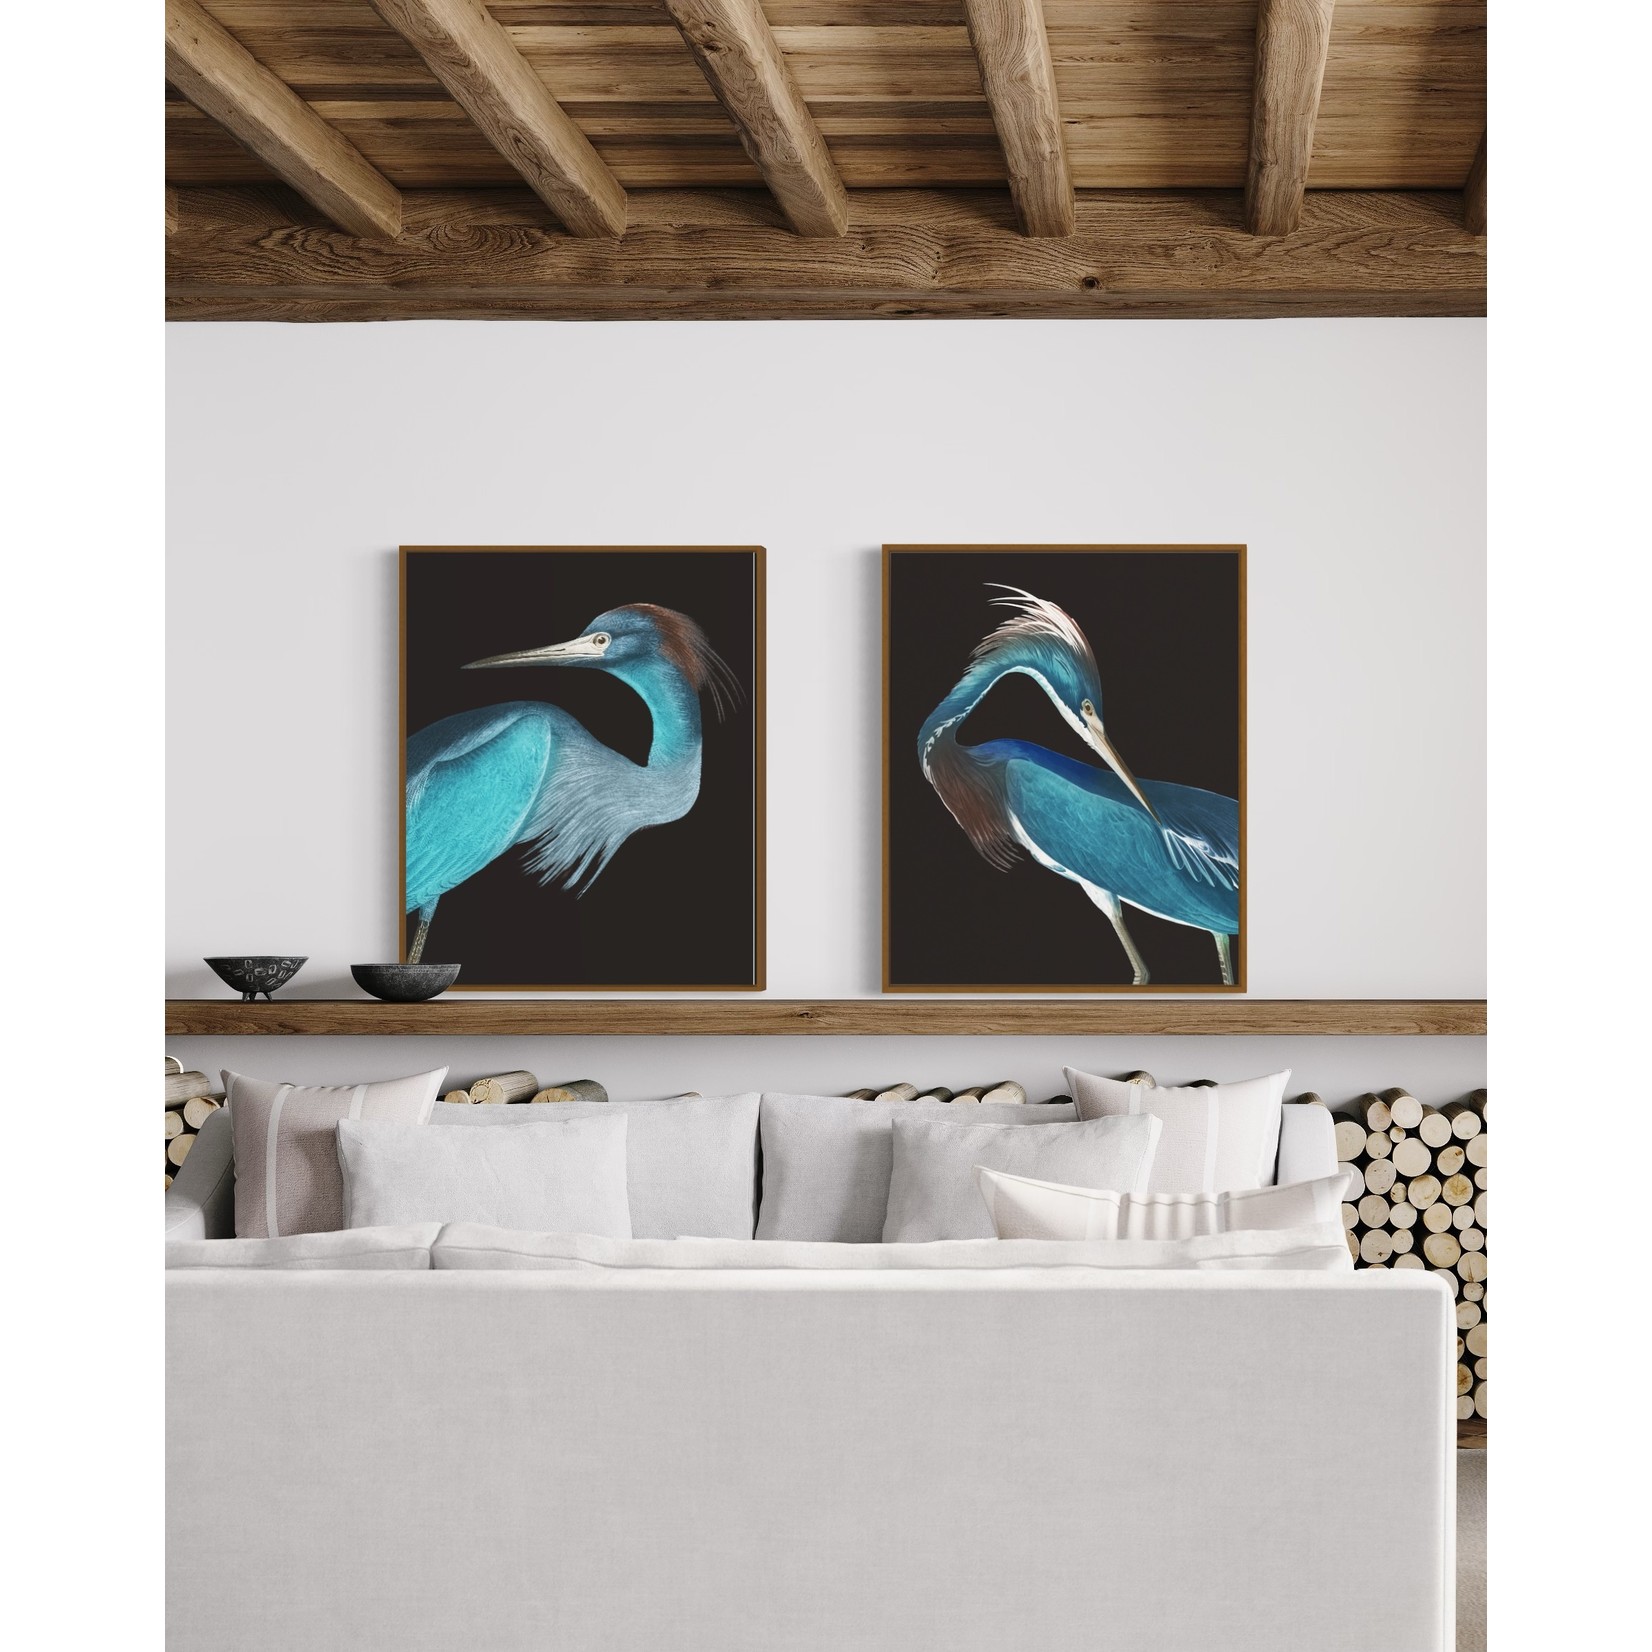 Framed Print on Canvas: Blue Heron ( Rectangular)  Canvas with a brushed Gold Floater frame  33 x 41 inches high inches